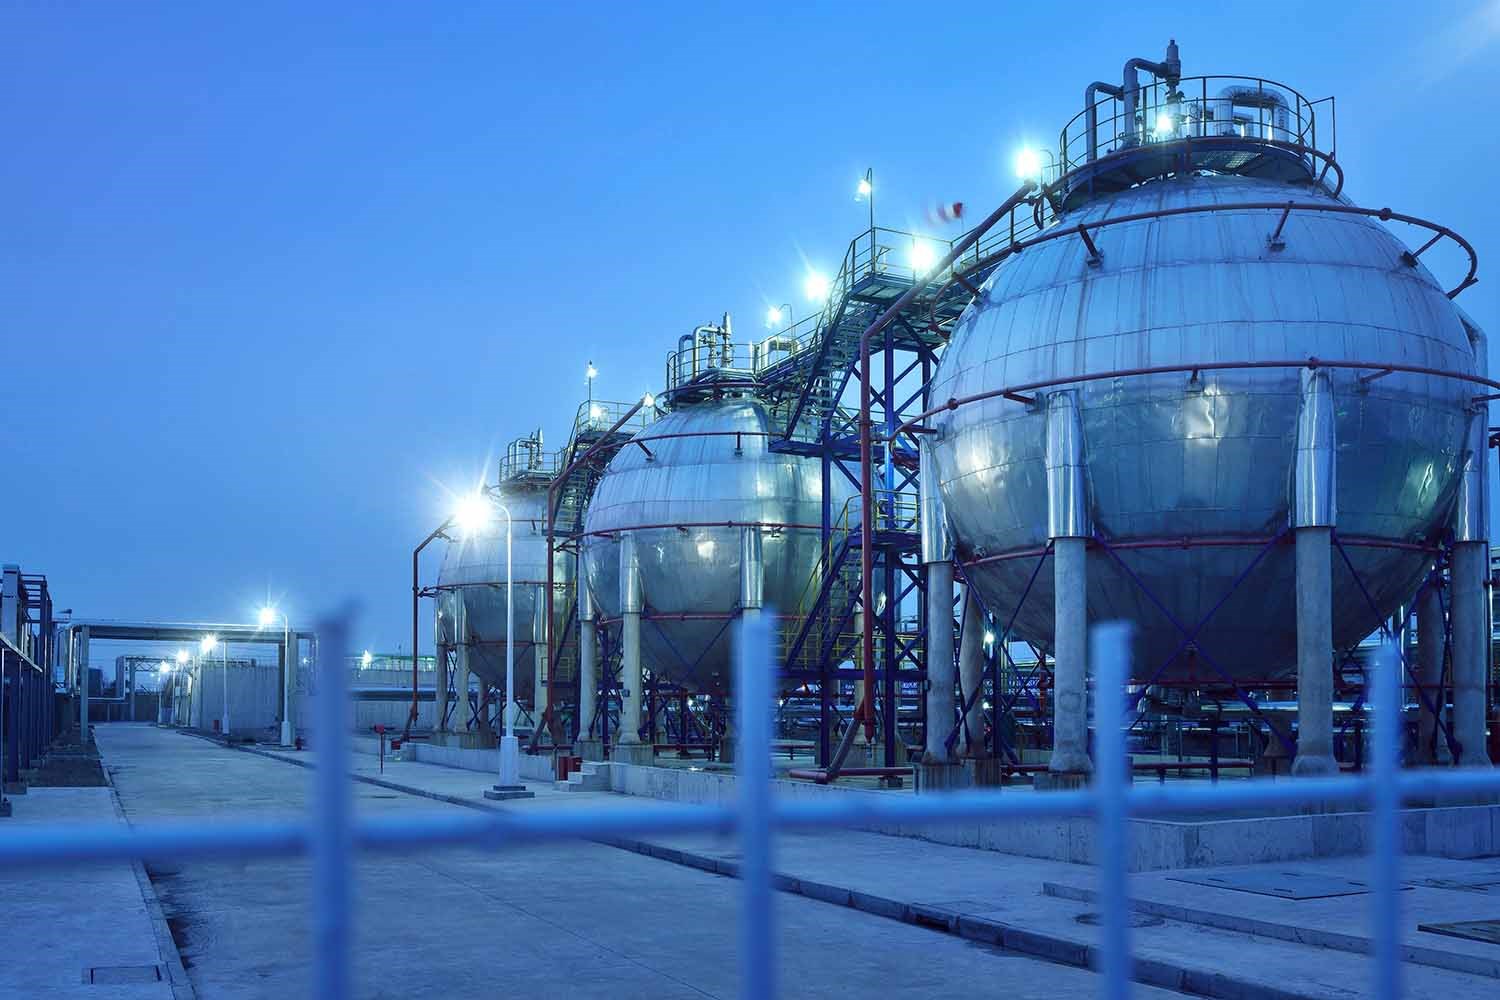 Row of Fuel Storage Tanks Lit Up At Night at a Chemical Plant